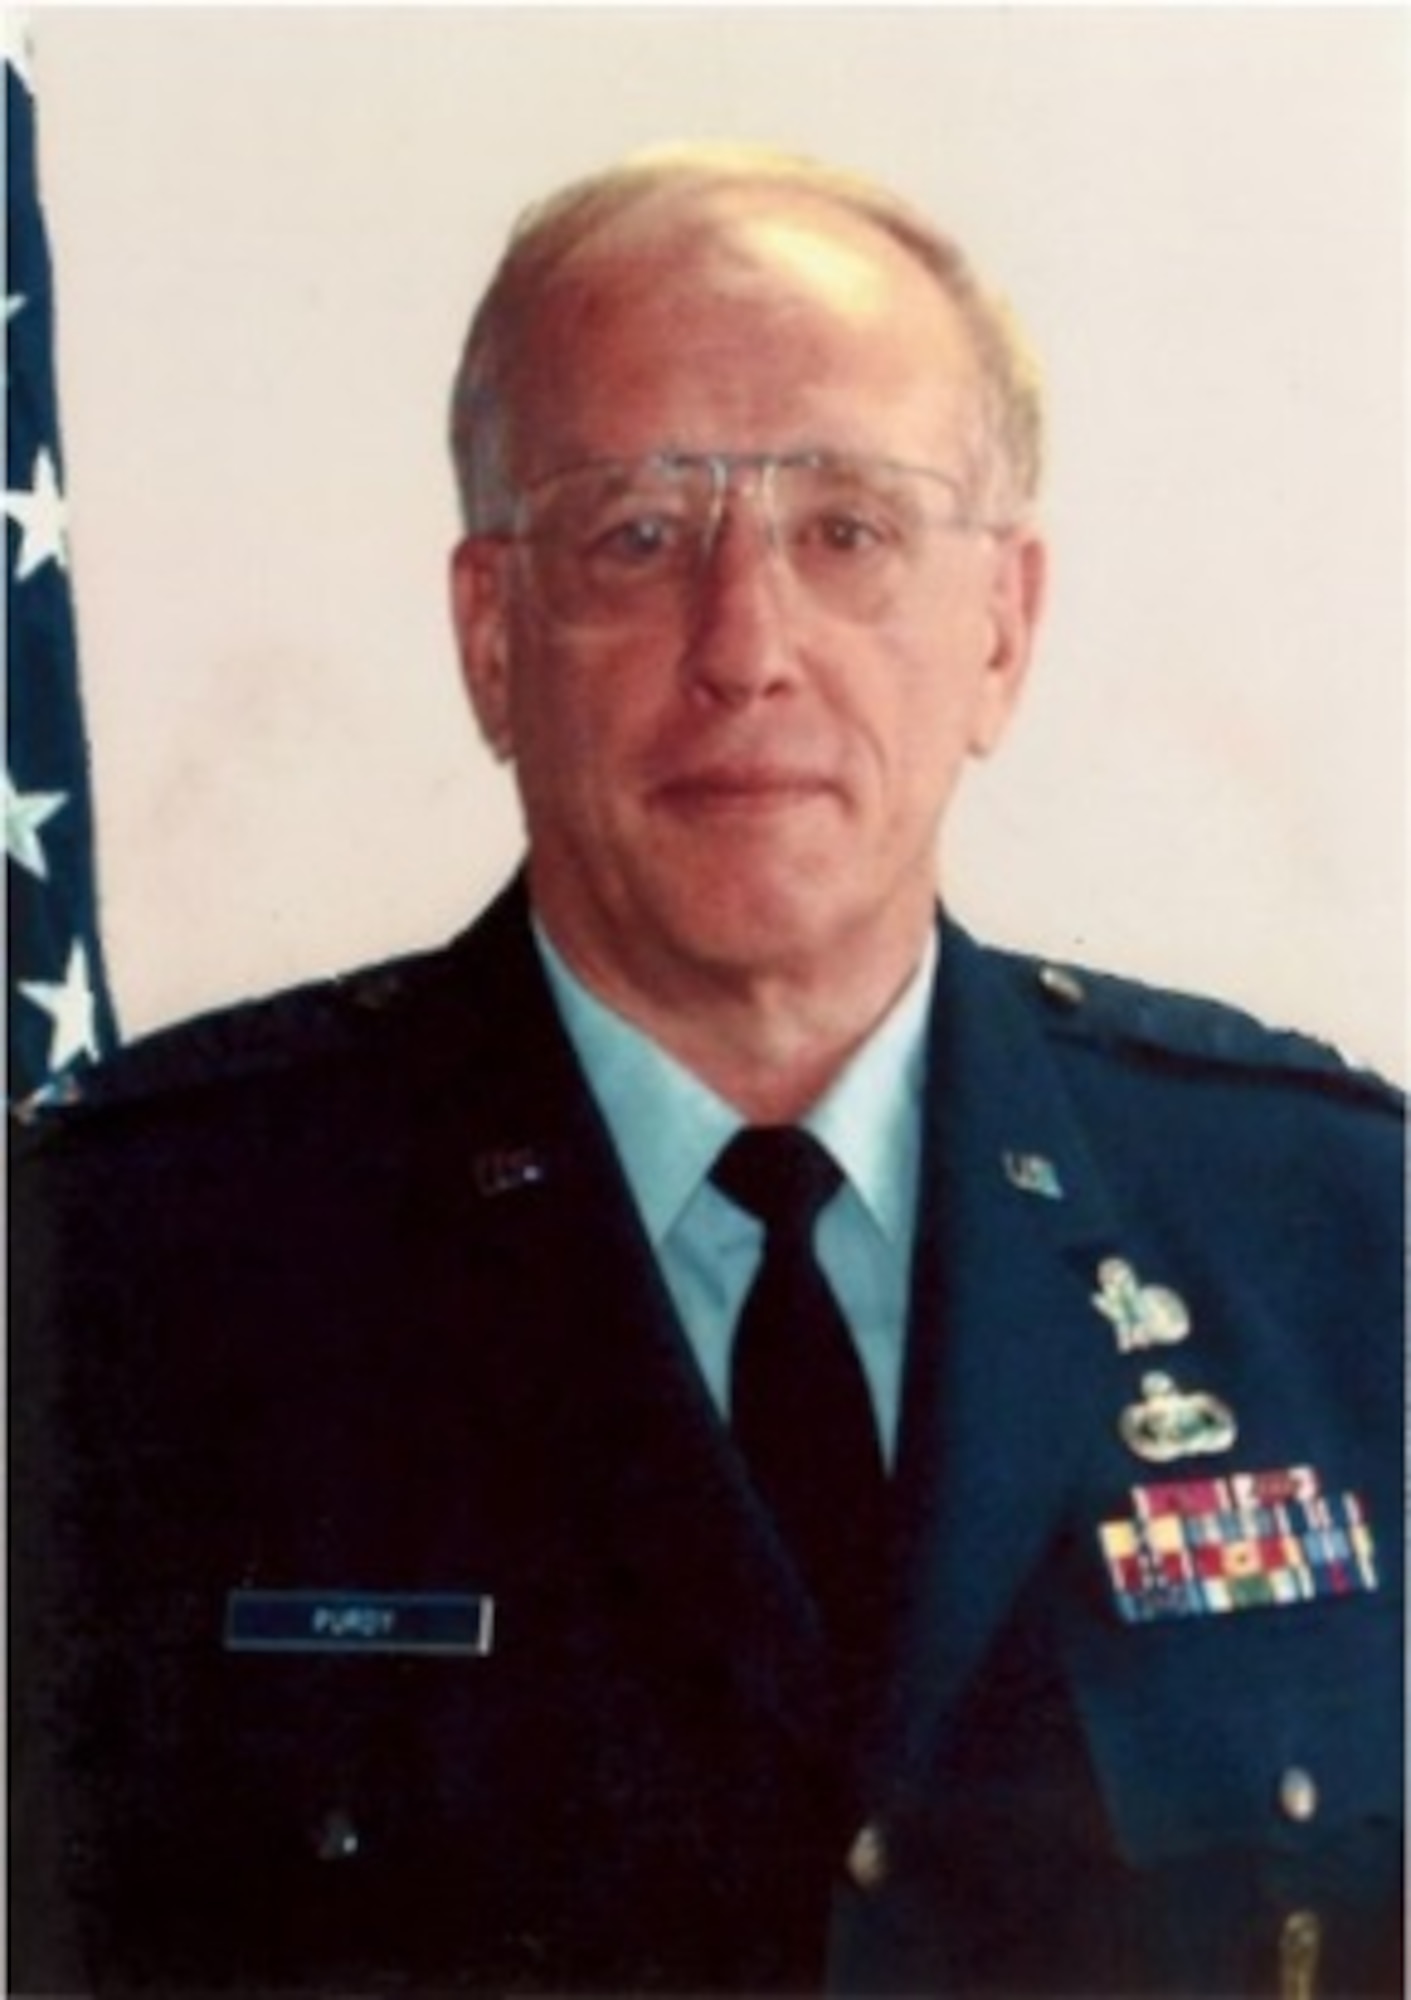 Col. Stephen Purdy, Sr.,
Director, Satellite Communications System
6 May 1989 – 14 Jul 1992
